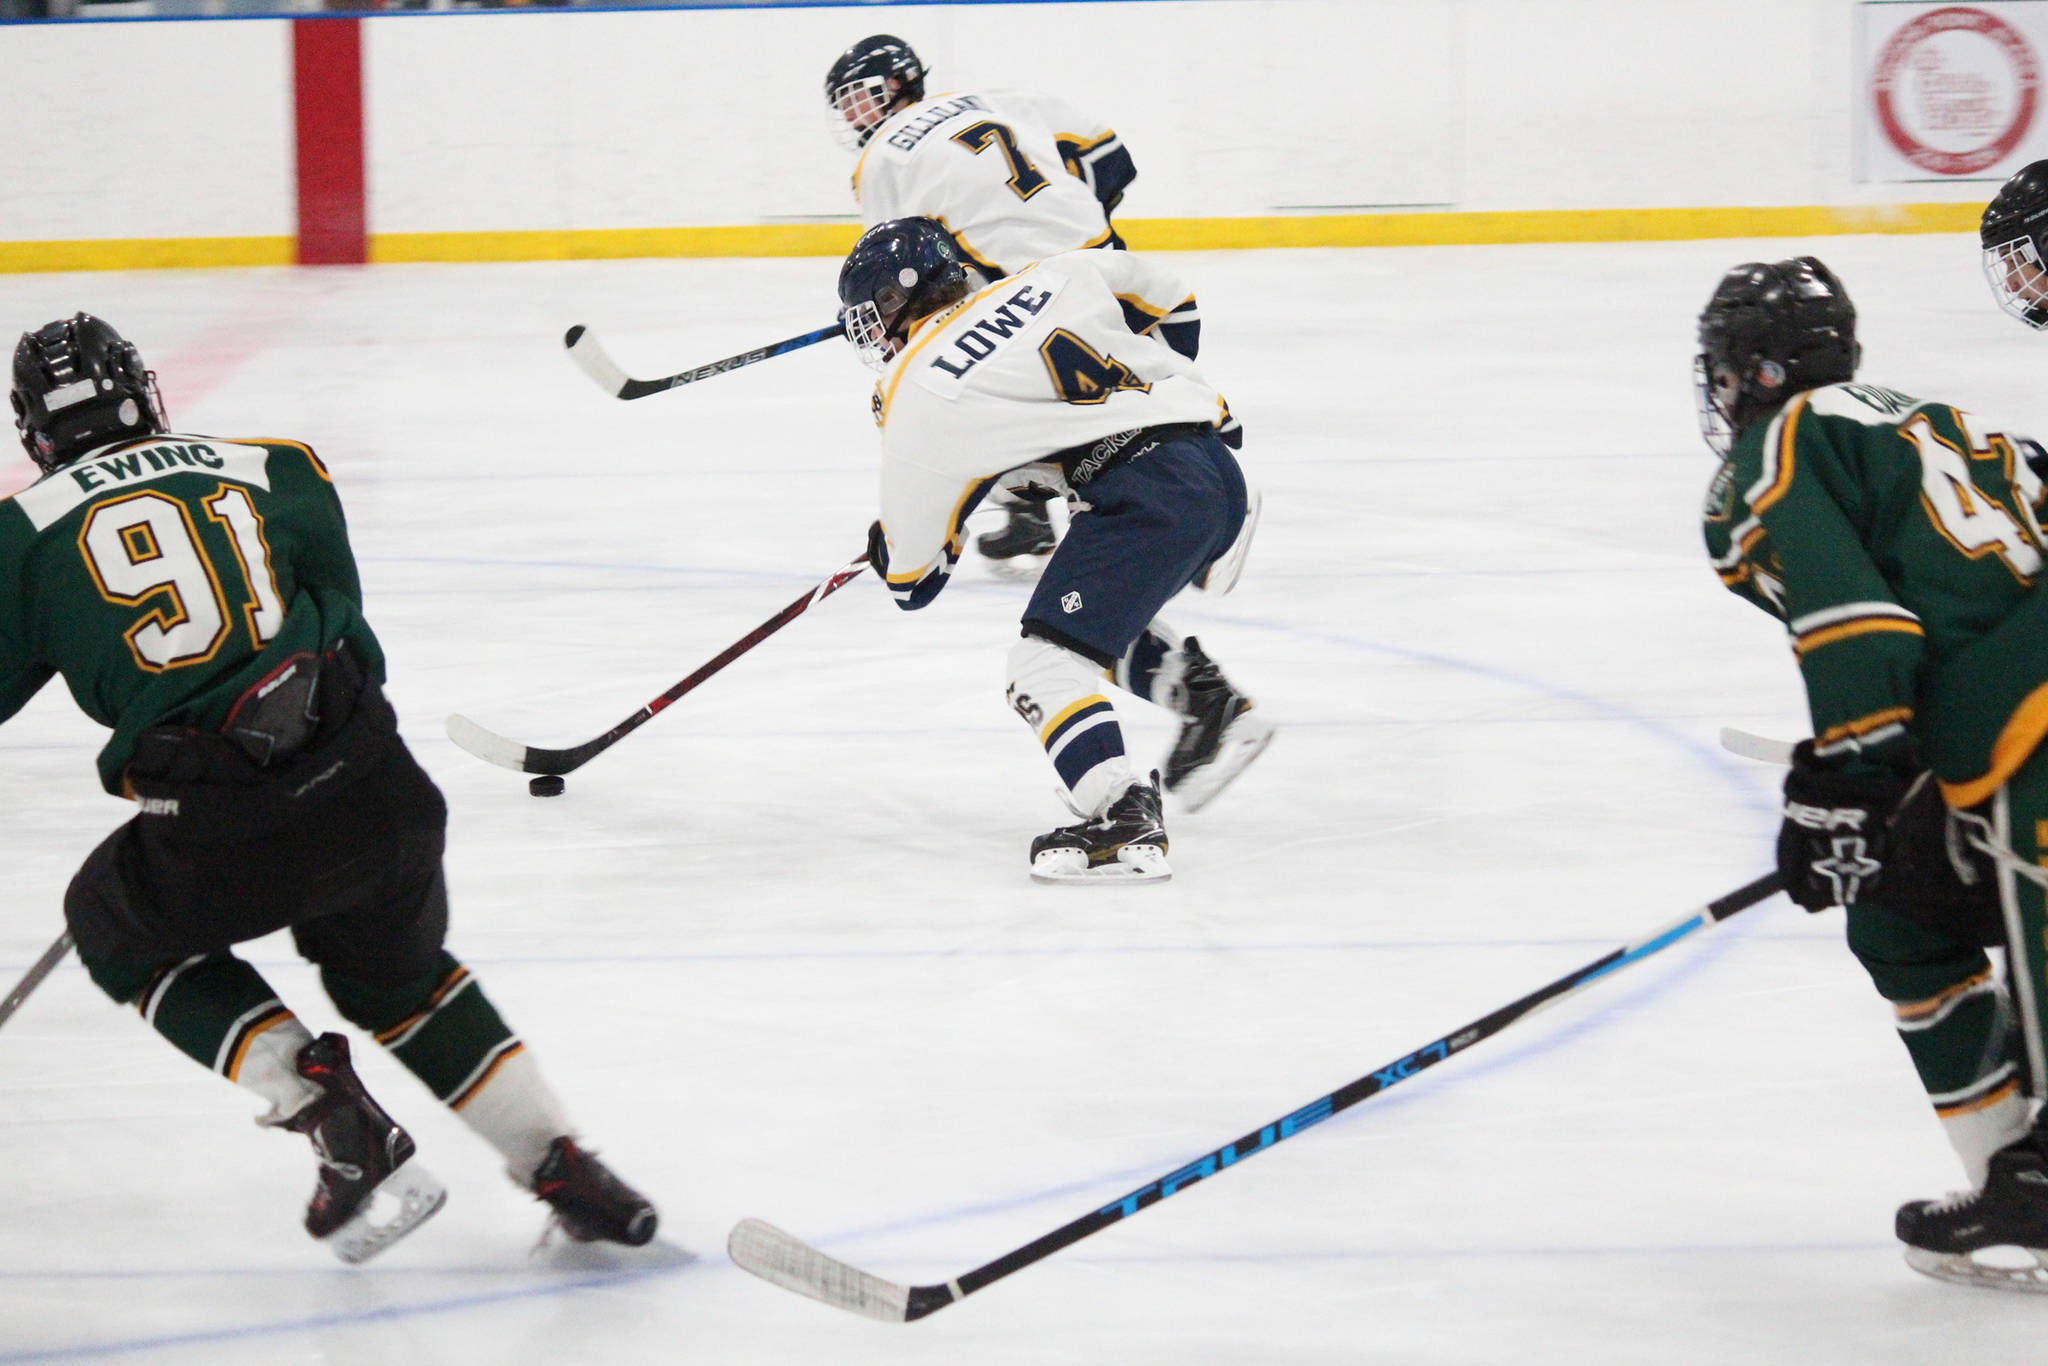 Homer’s Lee Lowe skates with the puck, pursued by several Colony High School players, during their hockey game Friday, Dec. 1, 2017 at Kevin Bell Arena in Homer, Alaska. The Mariners beat Colony 2-1, and swept the Mat-Su Valley teams over the weekend, winning all three of their games. (Photo by Megan Pacer/Homer News)